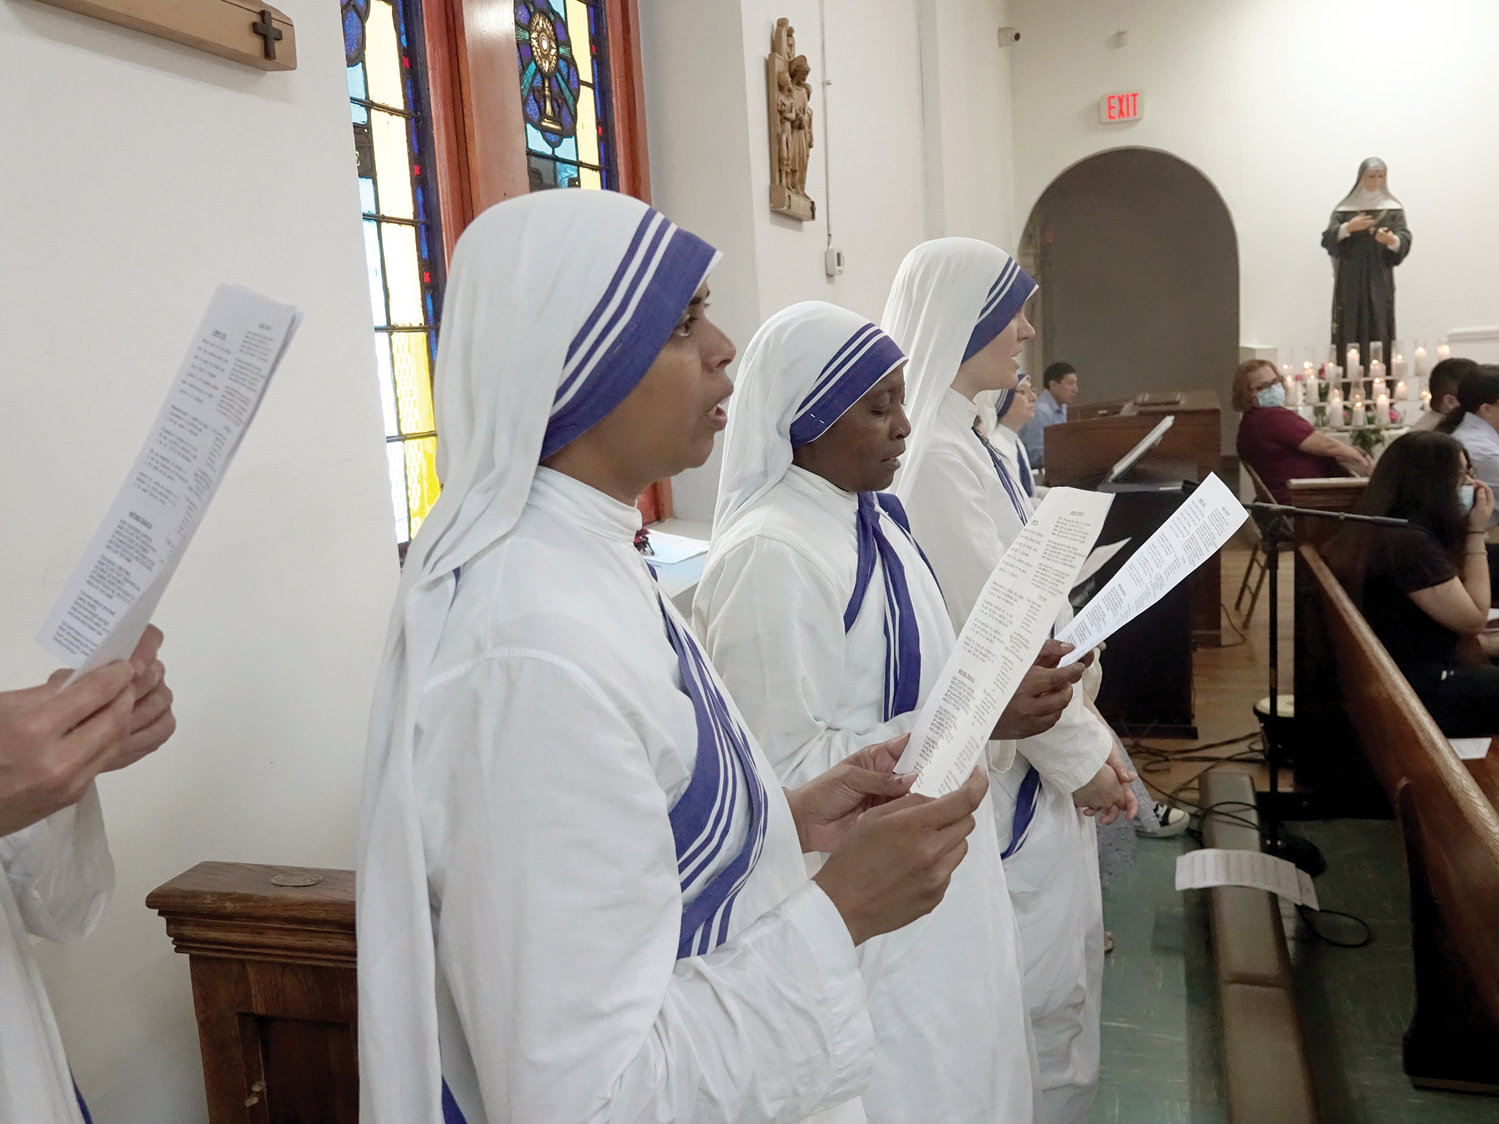 Missionaries of Charity sing during the 10 a.m. Mass Cardinal Dolan celebrated Sept. 5 at St. Rita of Cascia Church, the Bronx, in commemoration of the 25th anniversary of the death of St. Teresa of Calcutta, the order’s foundress.